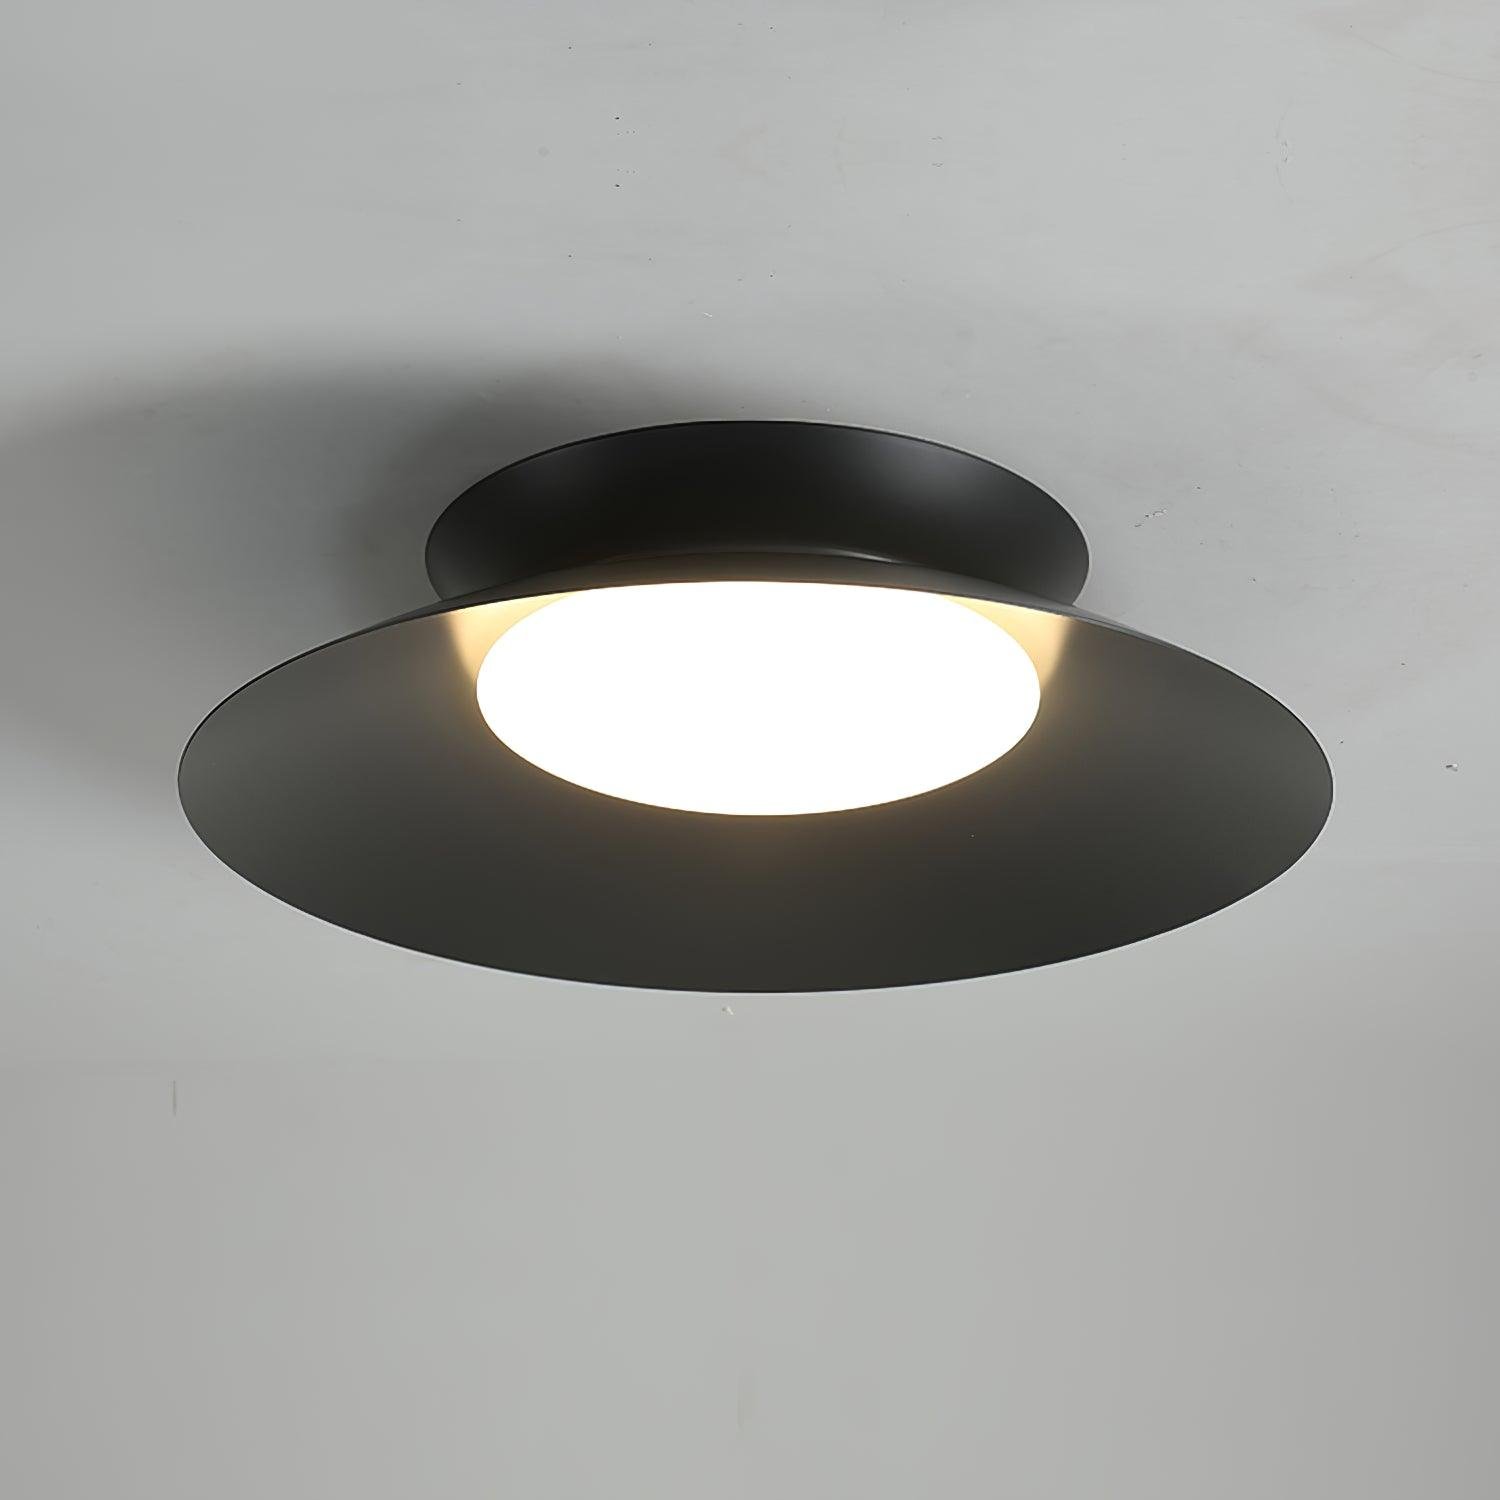 Black Cetra Ceiling Light in Cool Light with a Diameter of 26.8 inches and a Height of 6.5 inches (68cm x 16.5cm)